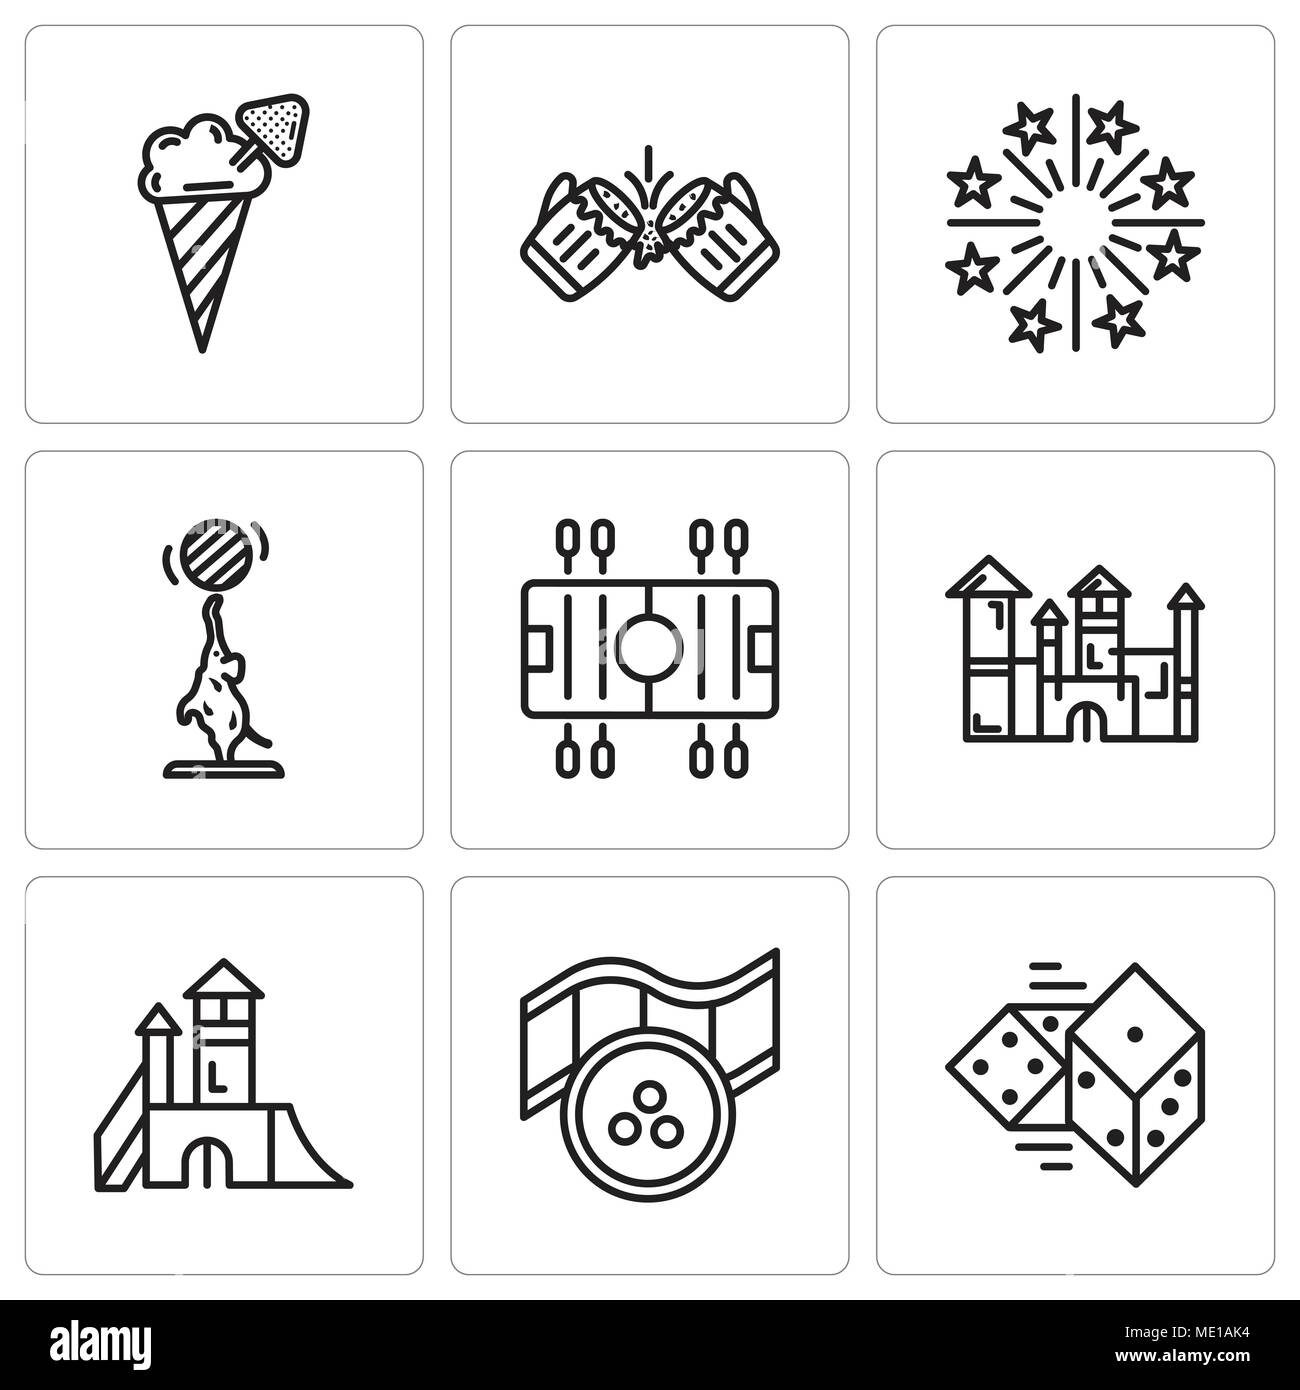 Set Of 9 simple editable icons such as Dices, Movie, Playground, Disneyland, Soccer, Elephant, Fireworks, Beer, Ice cream, can be used for mobile, web Stock Vector